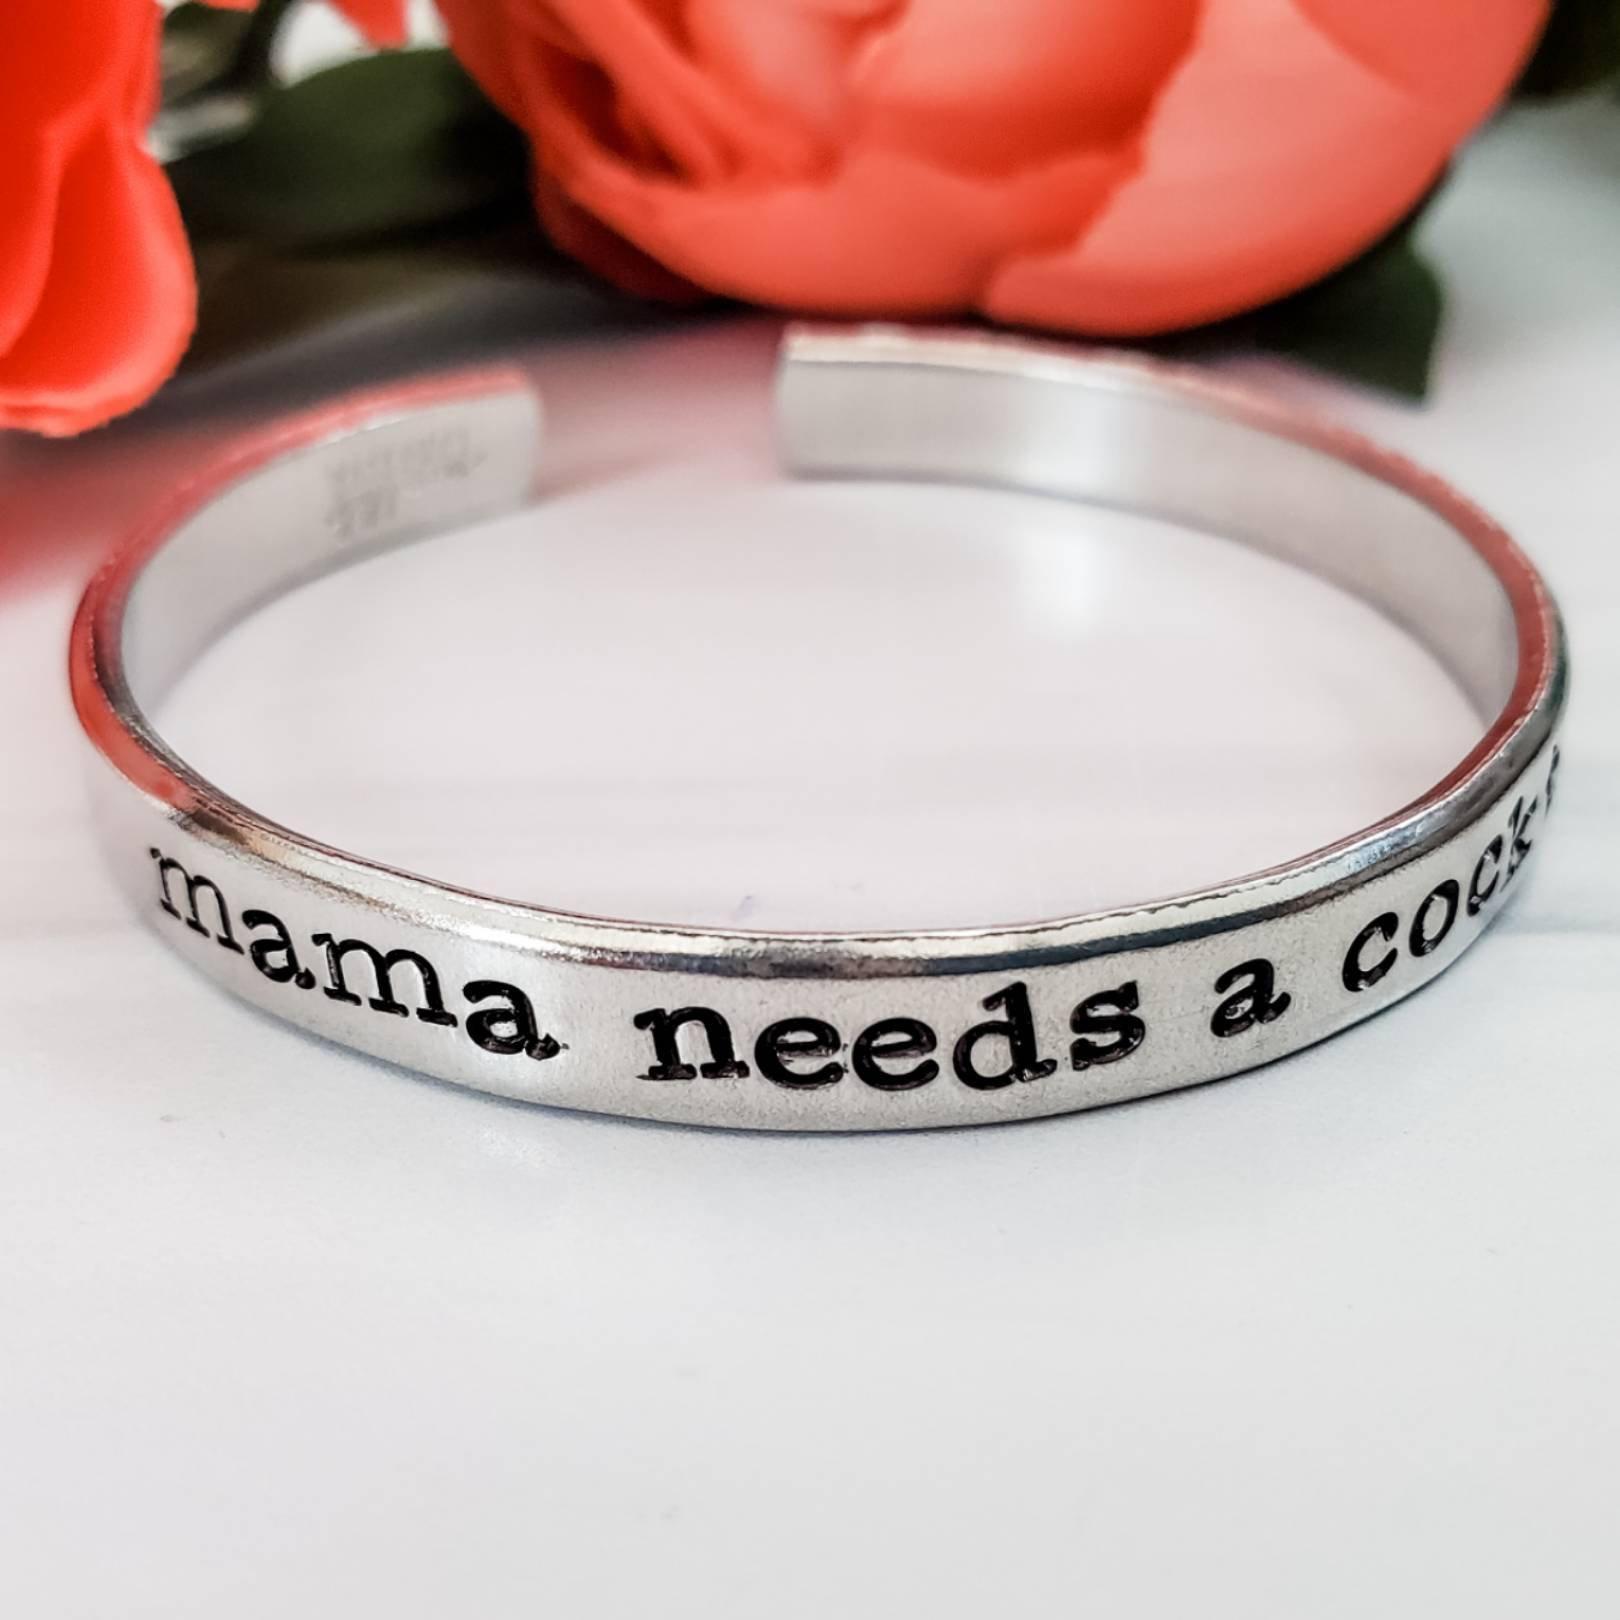 MAMA NEEDS A COCKTAIL Stacking Cuff Bracelet Salt and Sparkle